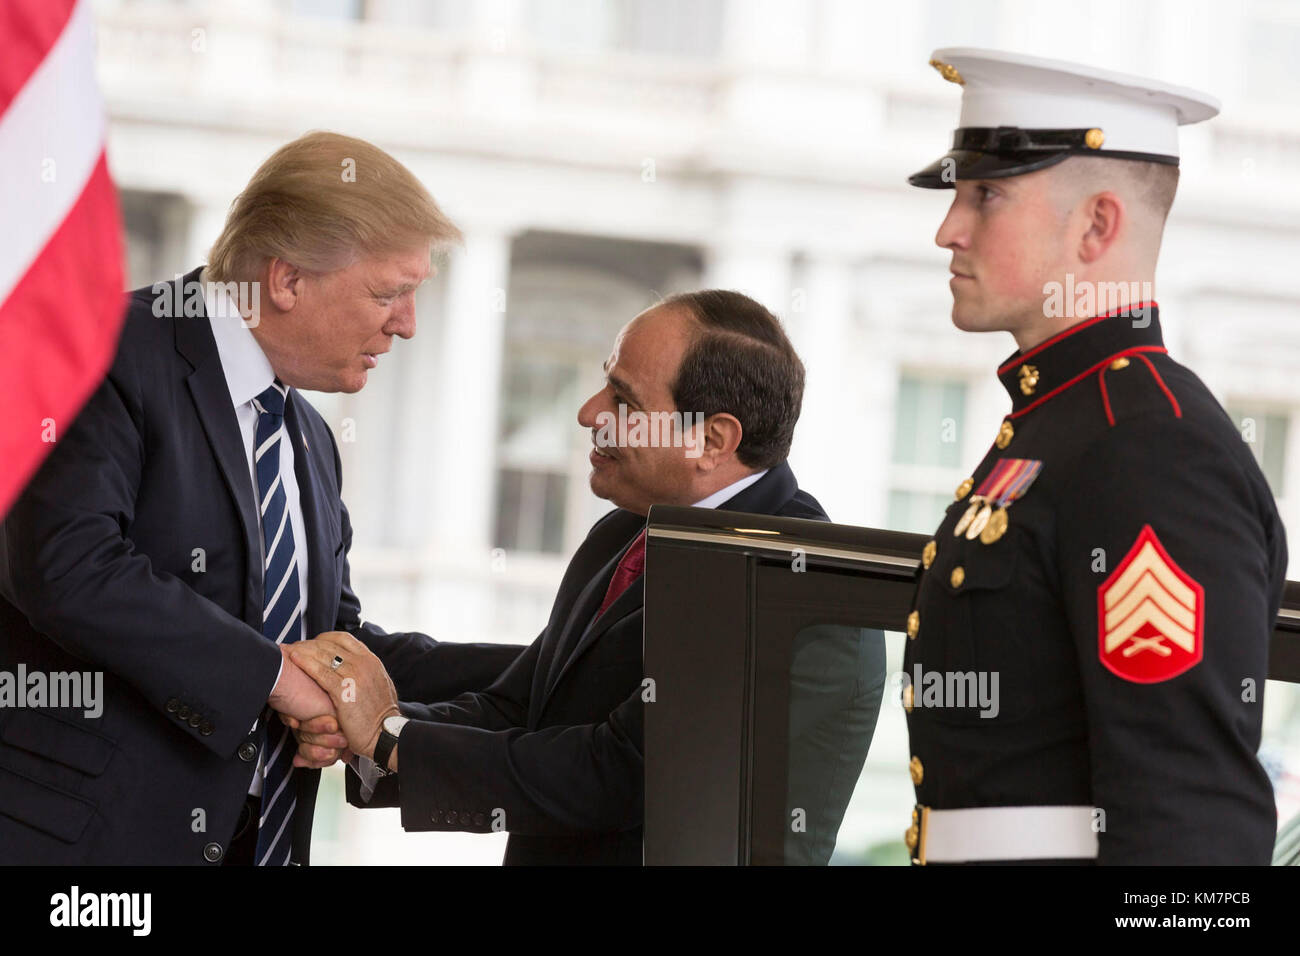 President Donald Trump welcomes Egyptian President Abdel Fattah el-Sisi, Monday, April 3, 2017, at the West Wing entrance of the White House in Washington, D.C. Stock Photo